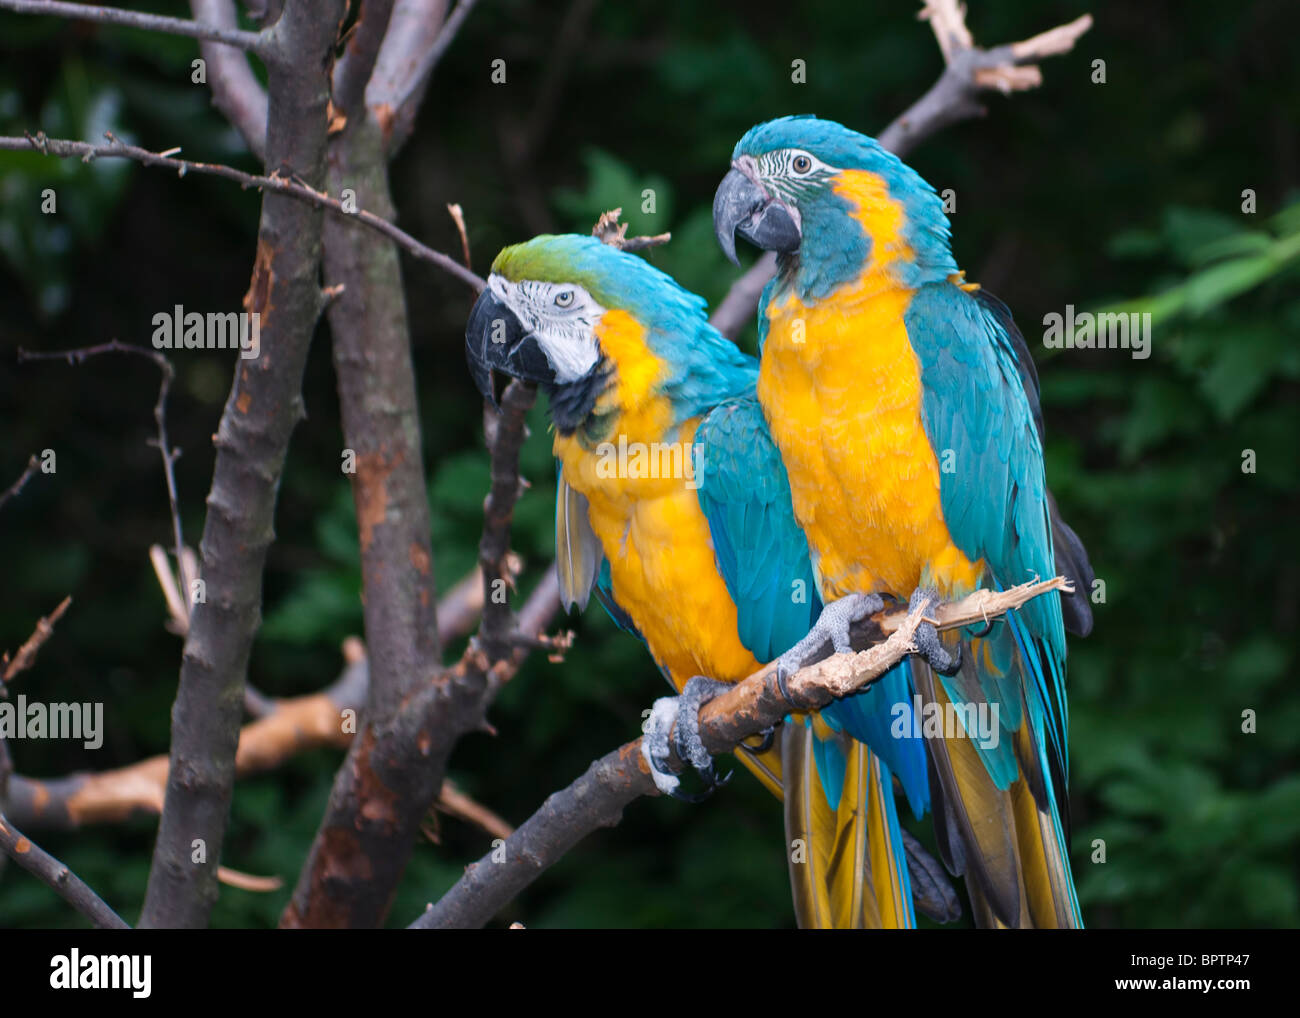 Blue-and-yellow Macaw (Ara ararauna), is a member of the group of large Neotropical parrots known as macaws. Stock Photo